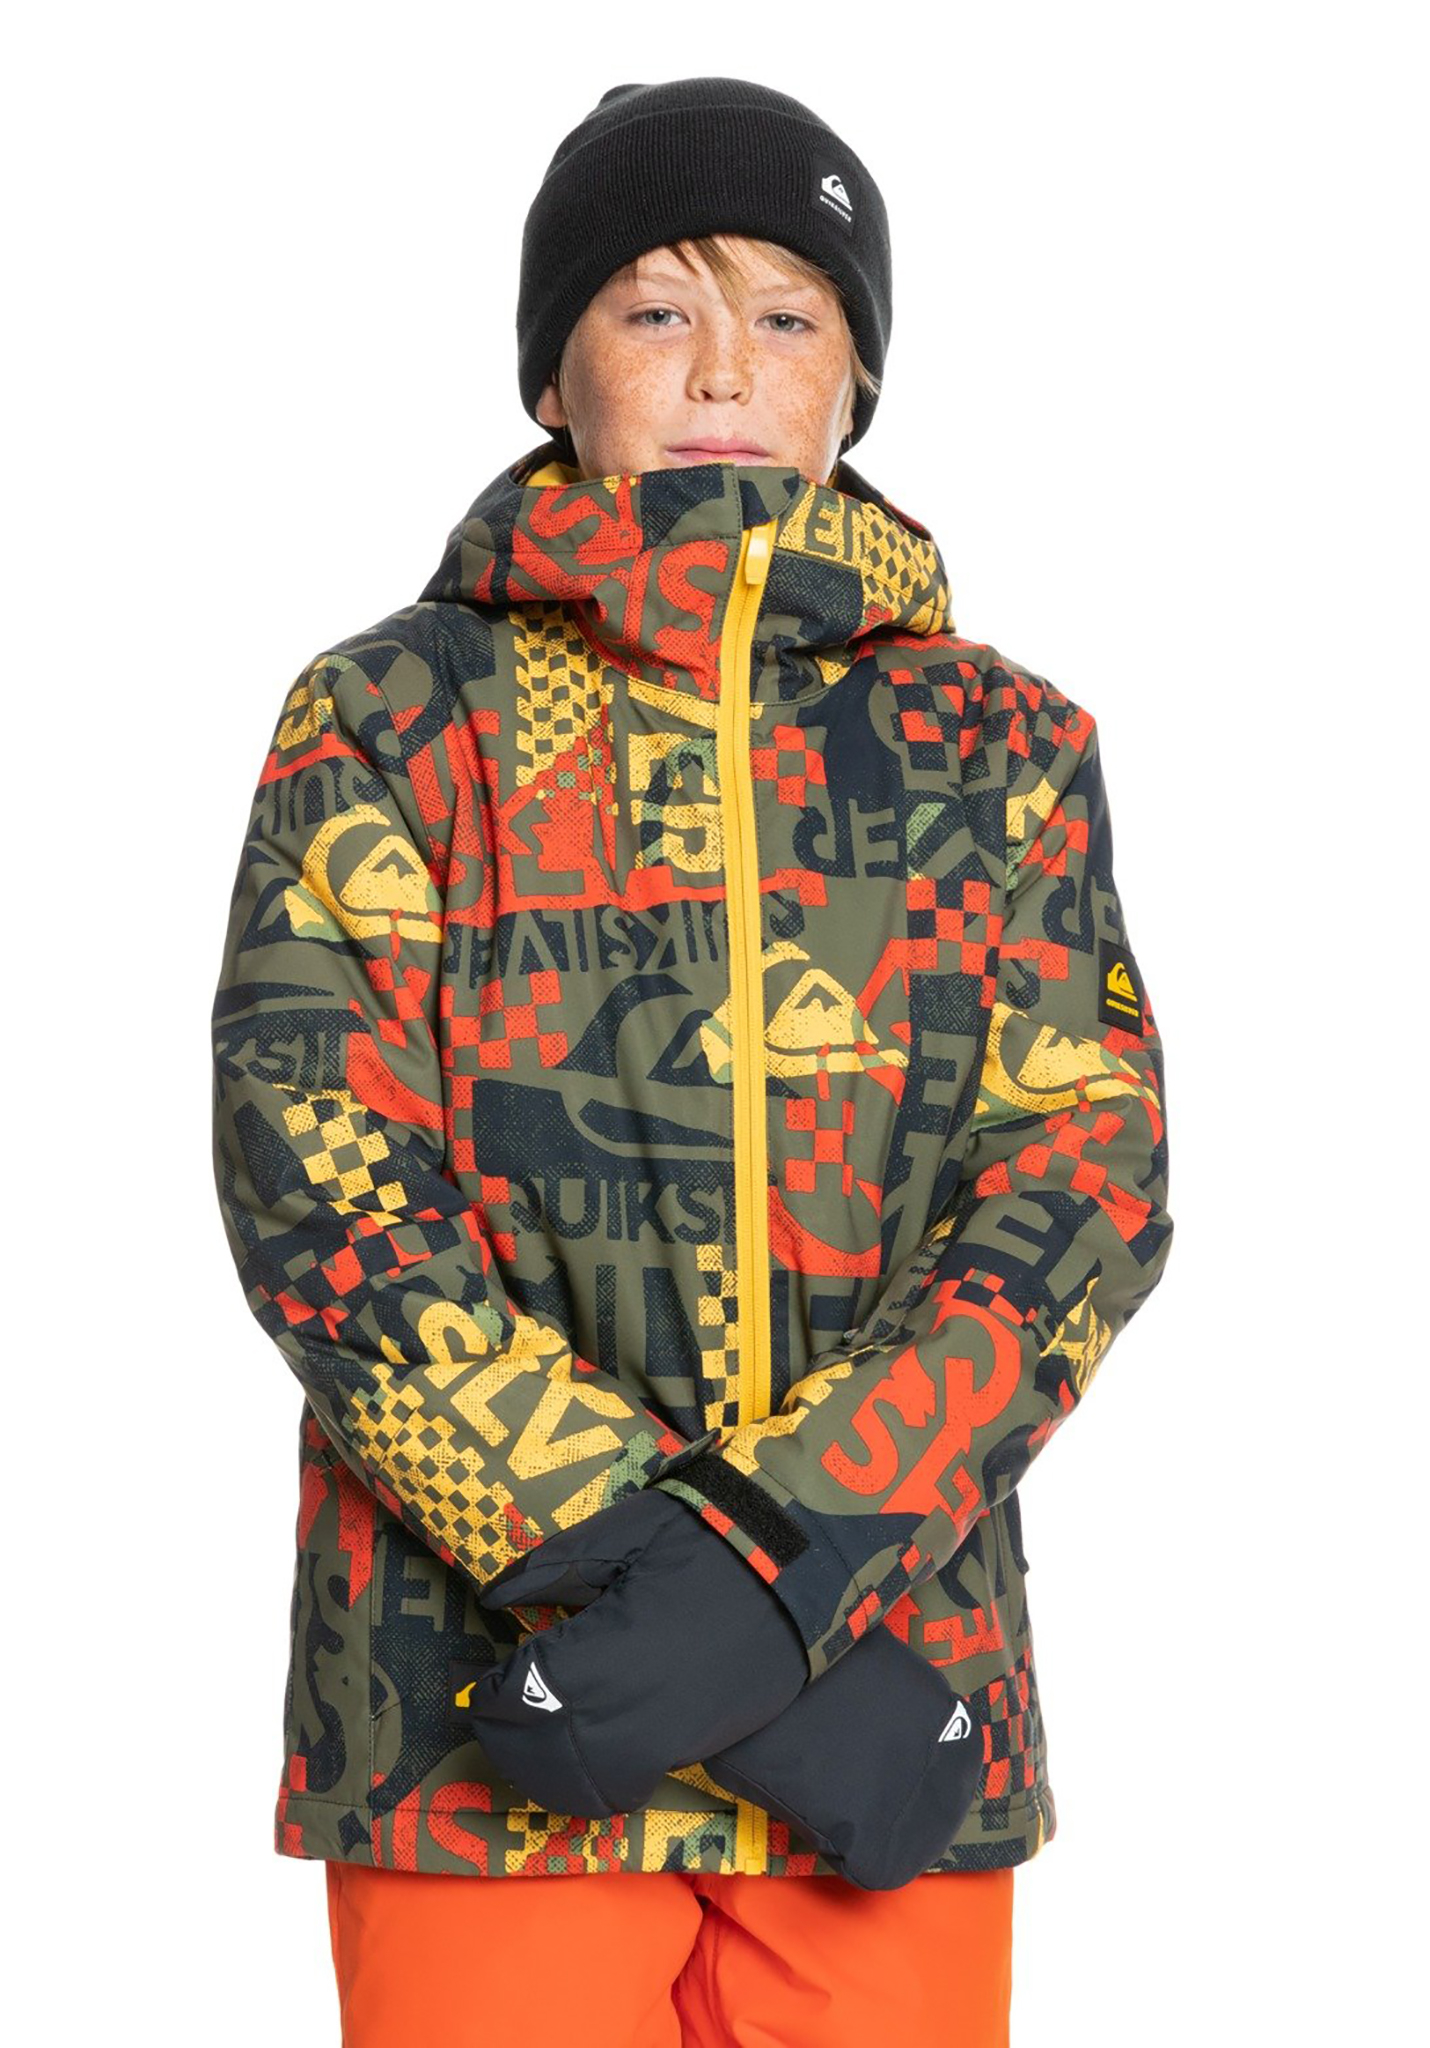 Quiksilver Mission Snowboardjacke pureed pumpkin brand call out 176